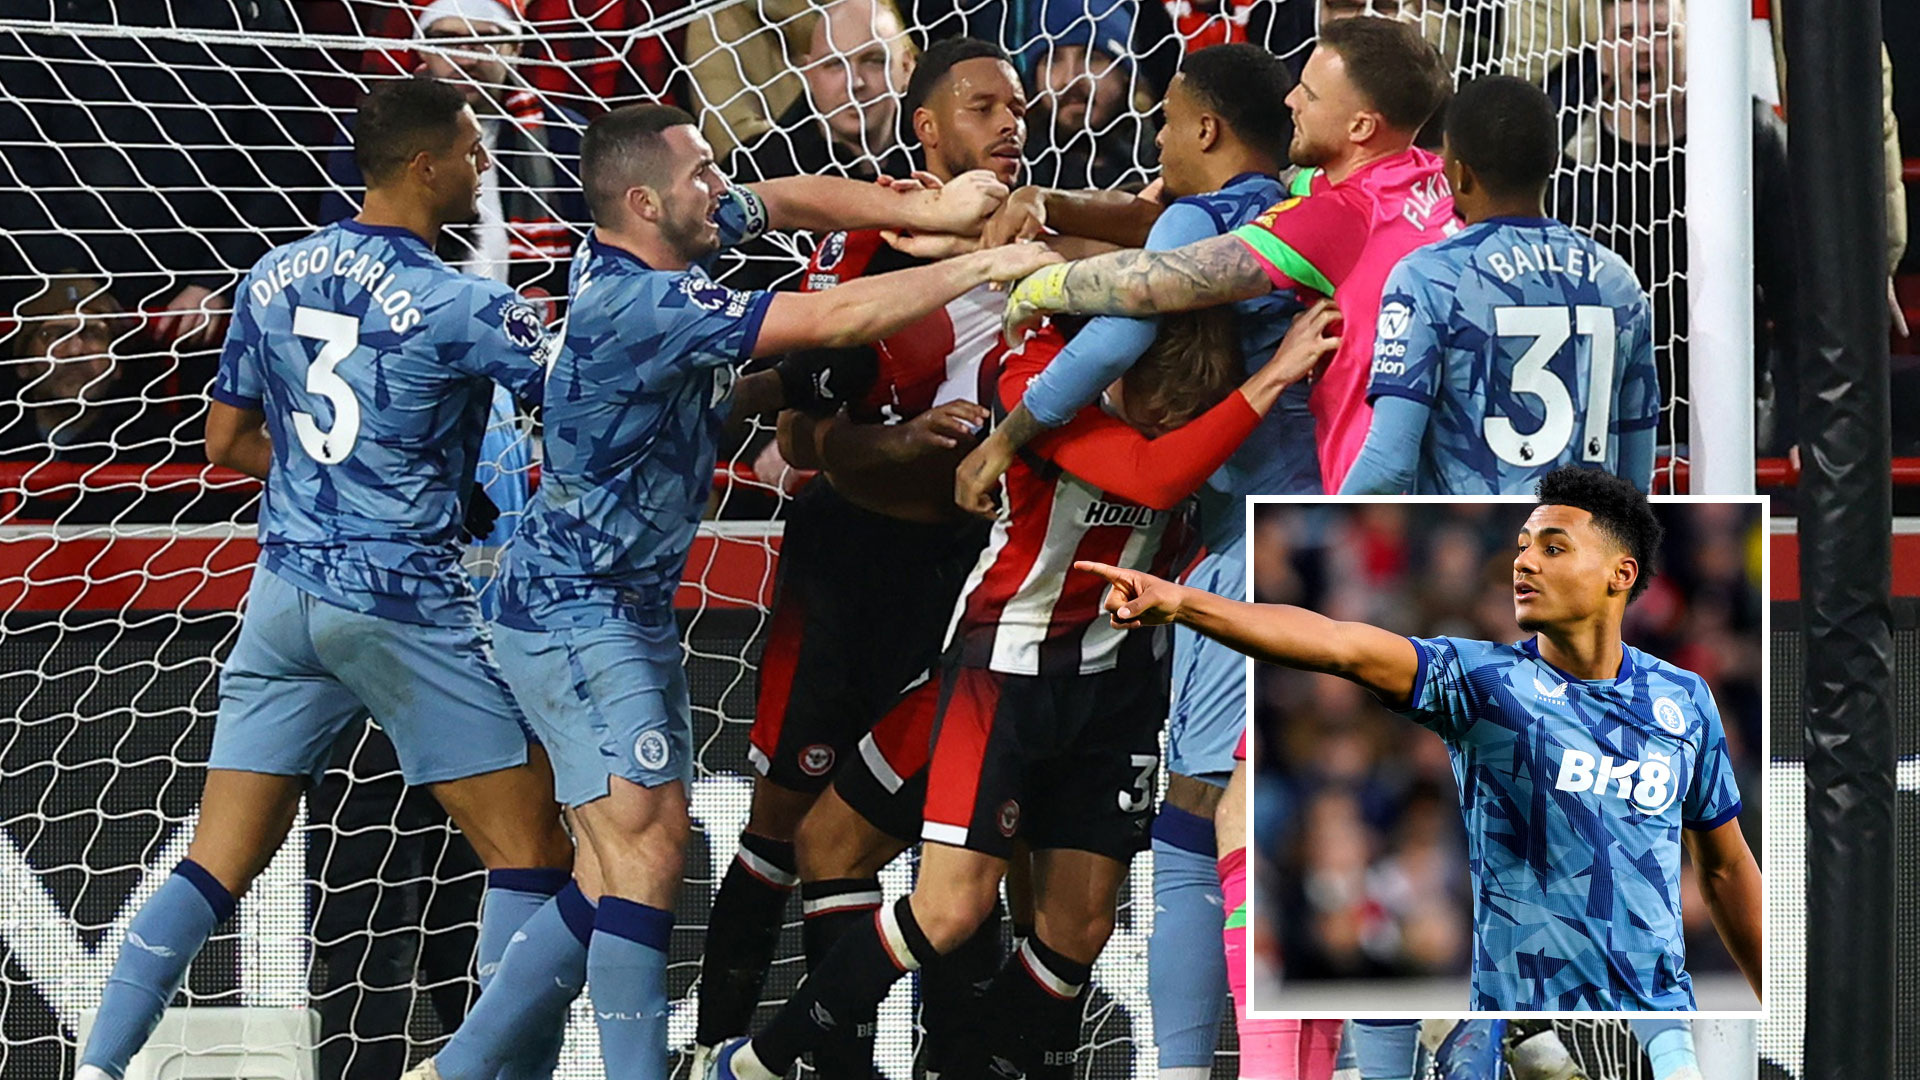 Ollie Watkins explains celebration that sparked furious brawl in Brentford's feisty clash with Aston Villa